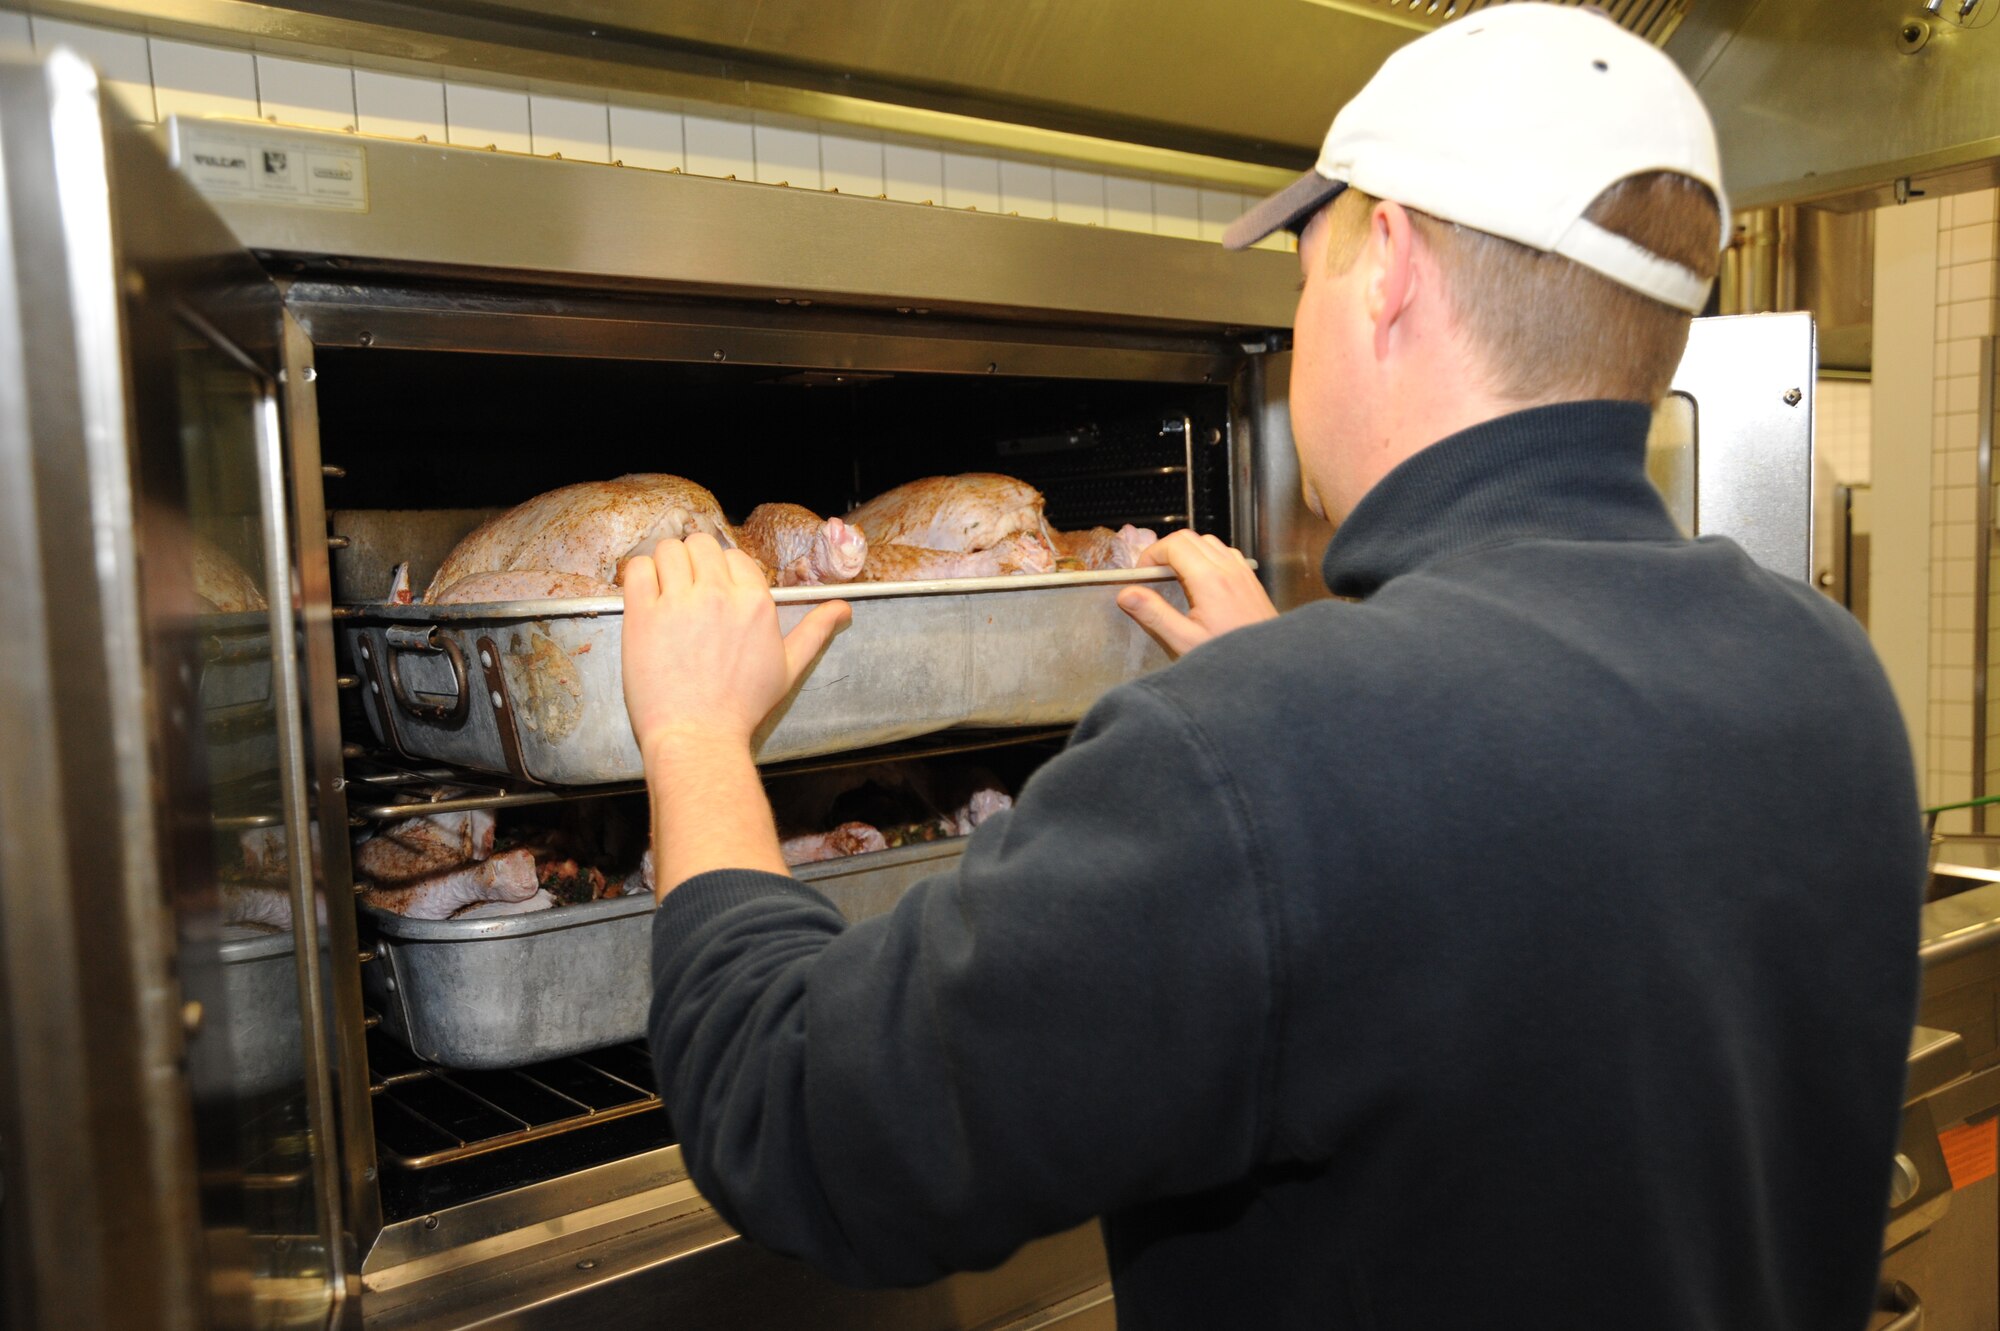 SPANGDAHLEM AIR BASE, Germany-- Dennis Tautges, a chef for the 52nd Force Support Squadron, puts turkeys into an oven Nov. 28, 2013, at the Mosel Hall Dining Facility. Kitchen staff prepared 10 turkeys and eight hams for the Thanksgiving holiday meal. (U.S. Air Force photo by Airman 1st Class Dylan Nuckolls/Released)